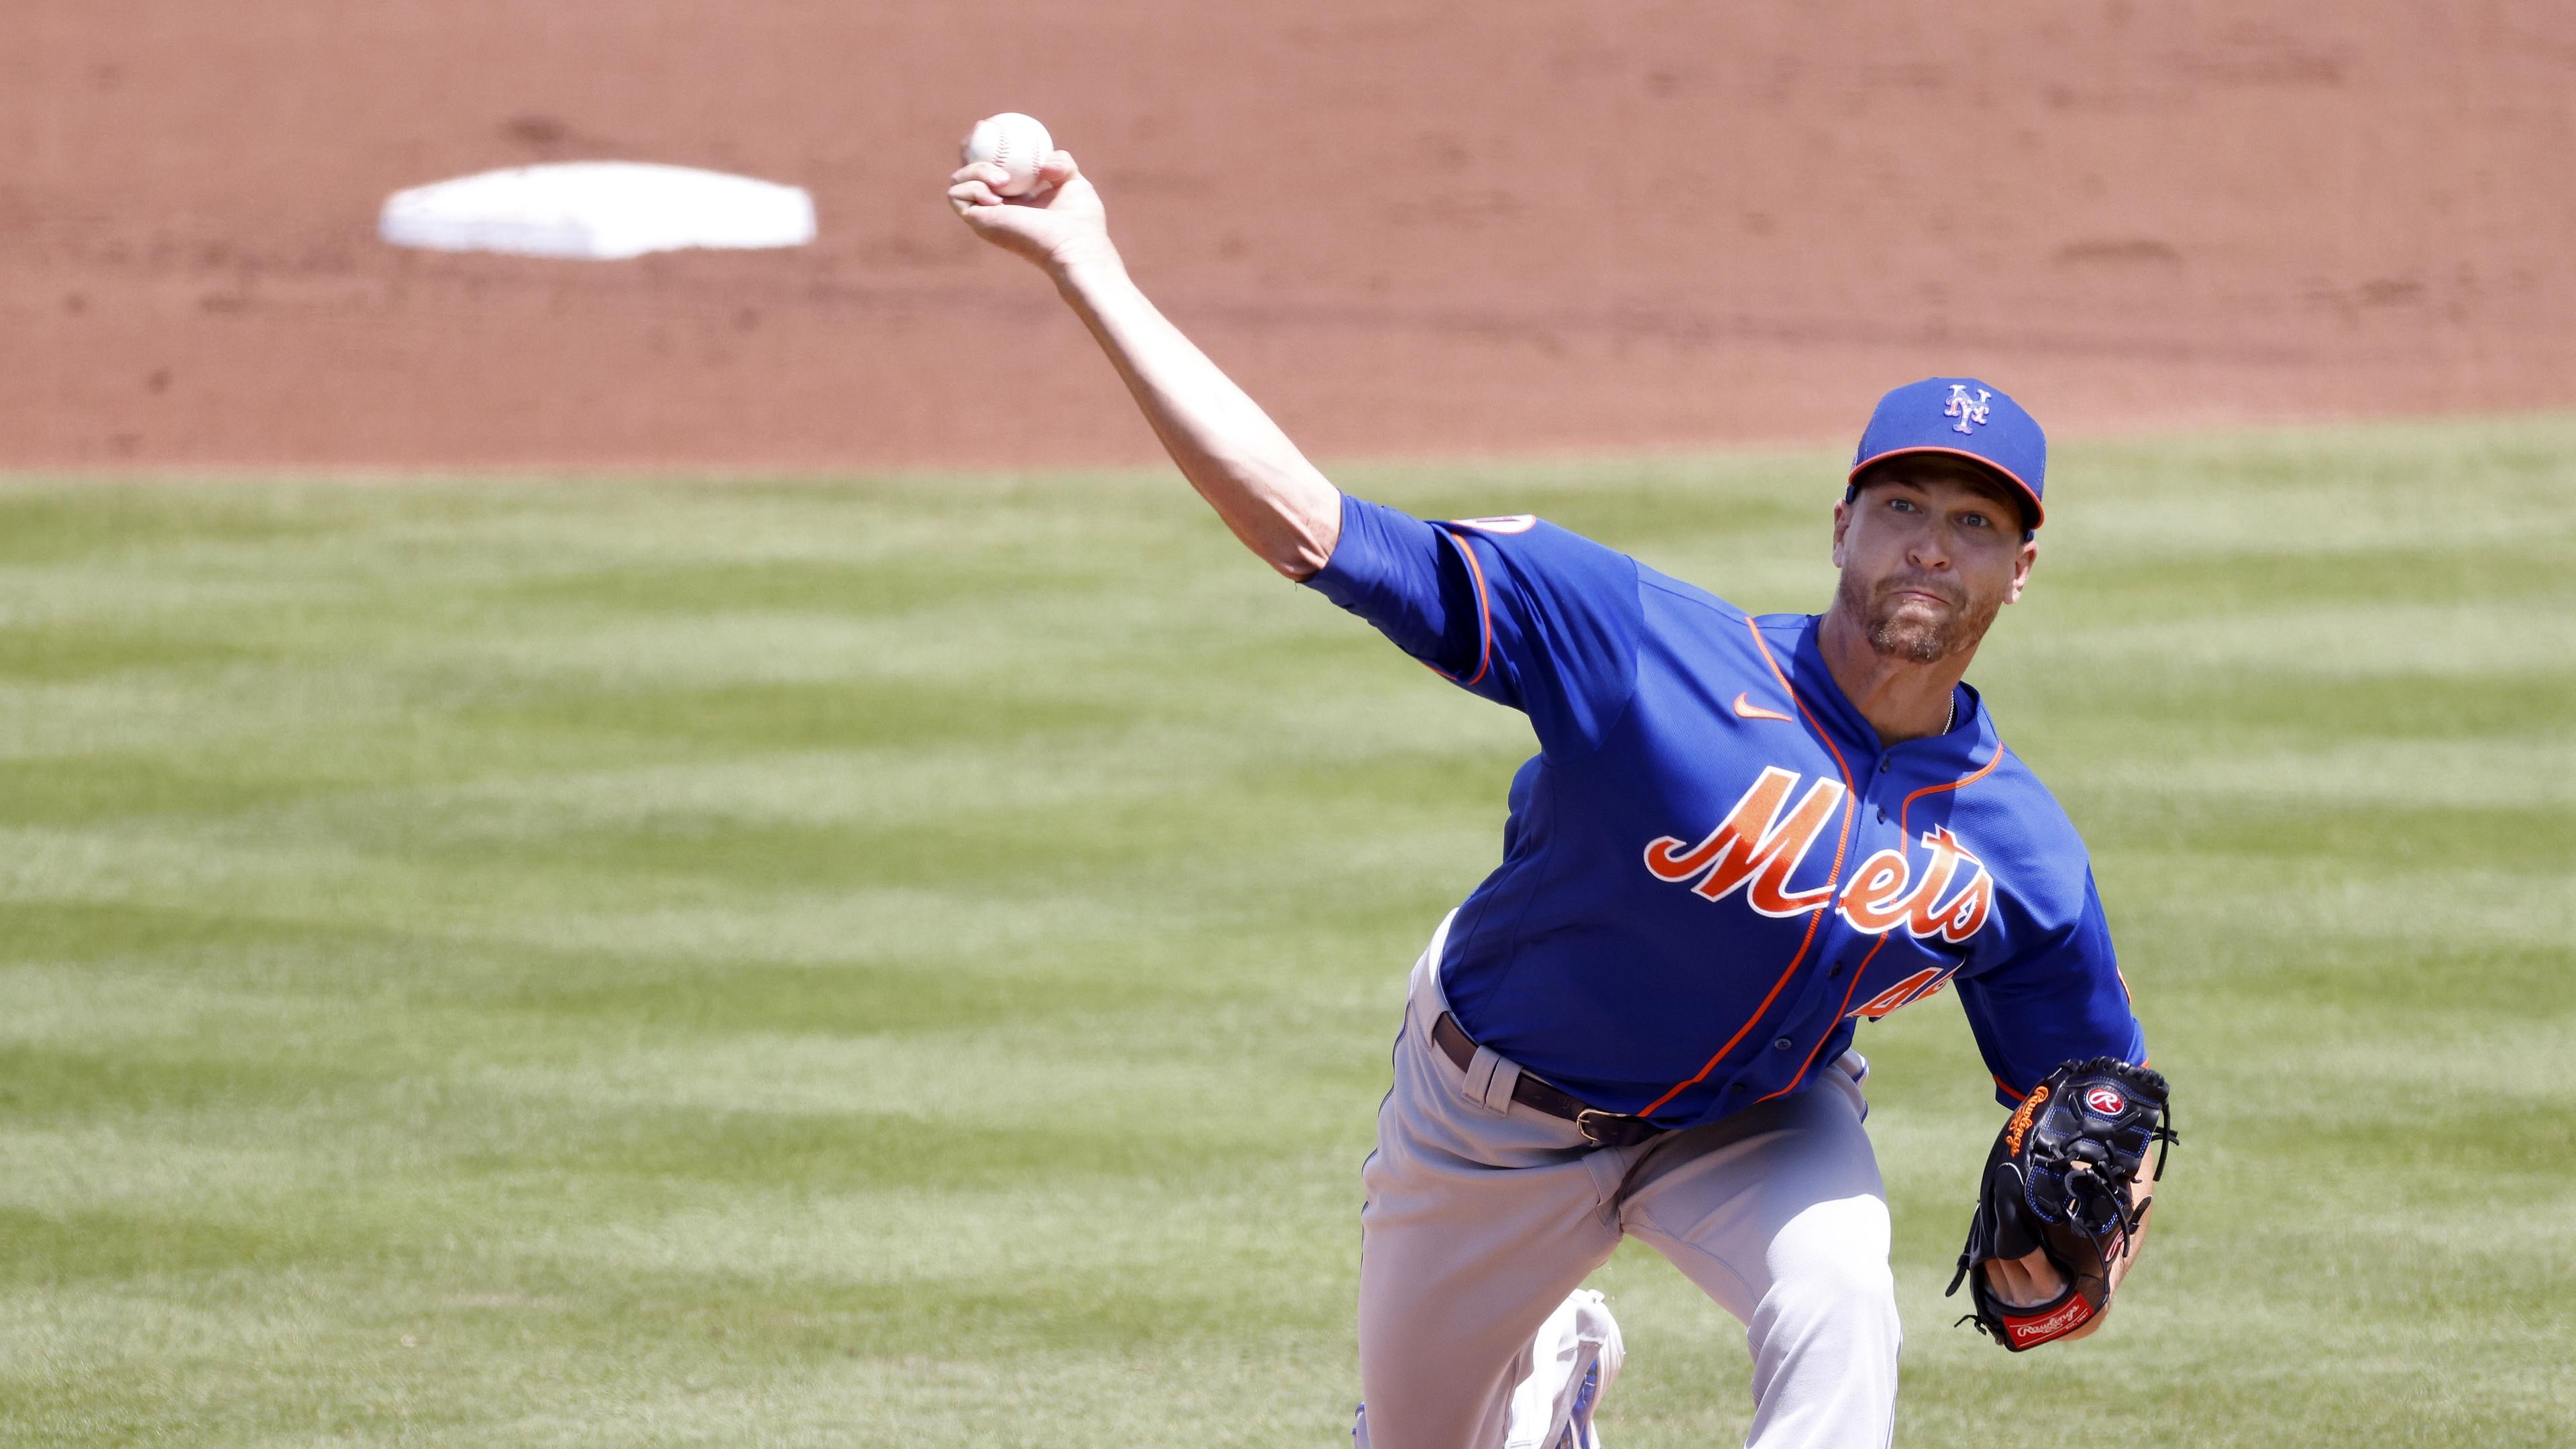 Mar 21, 2021; West Palm Beach, Florida, USA; New York Mets pitcher Jacob deGrom (48) throws during the first inning of a spring training game against the Washington Nationals at FITTEAM Ballpark of the Palm Beaches. Mandatory Credit: Rhona Wise-USA TODAY Sports / © Rhona Wise-USA TODAY Sports